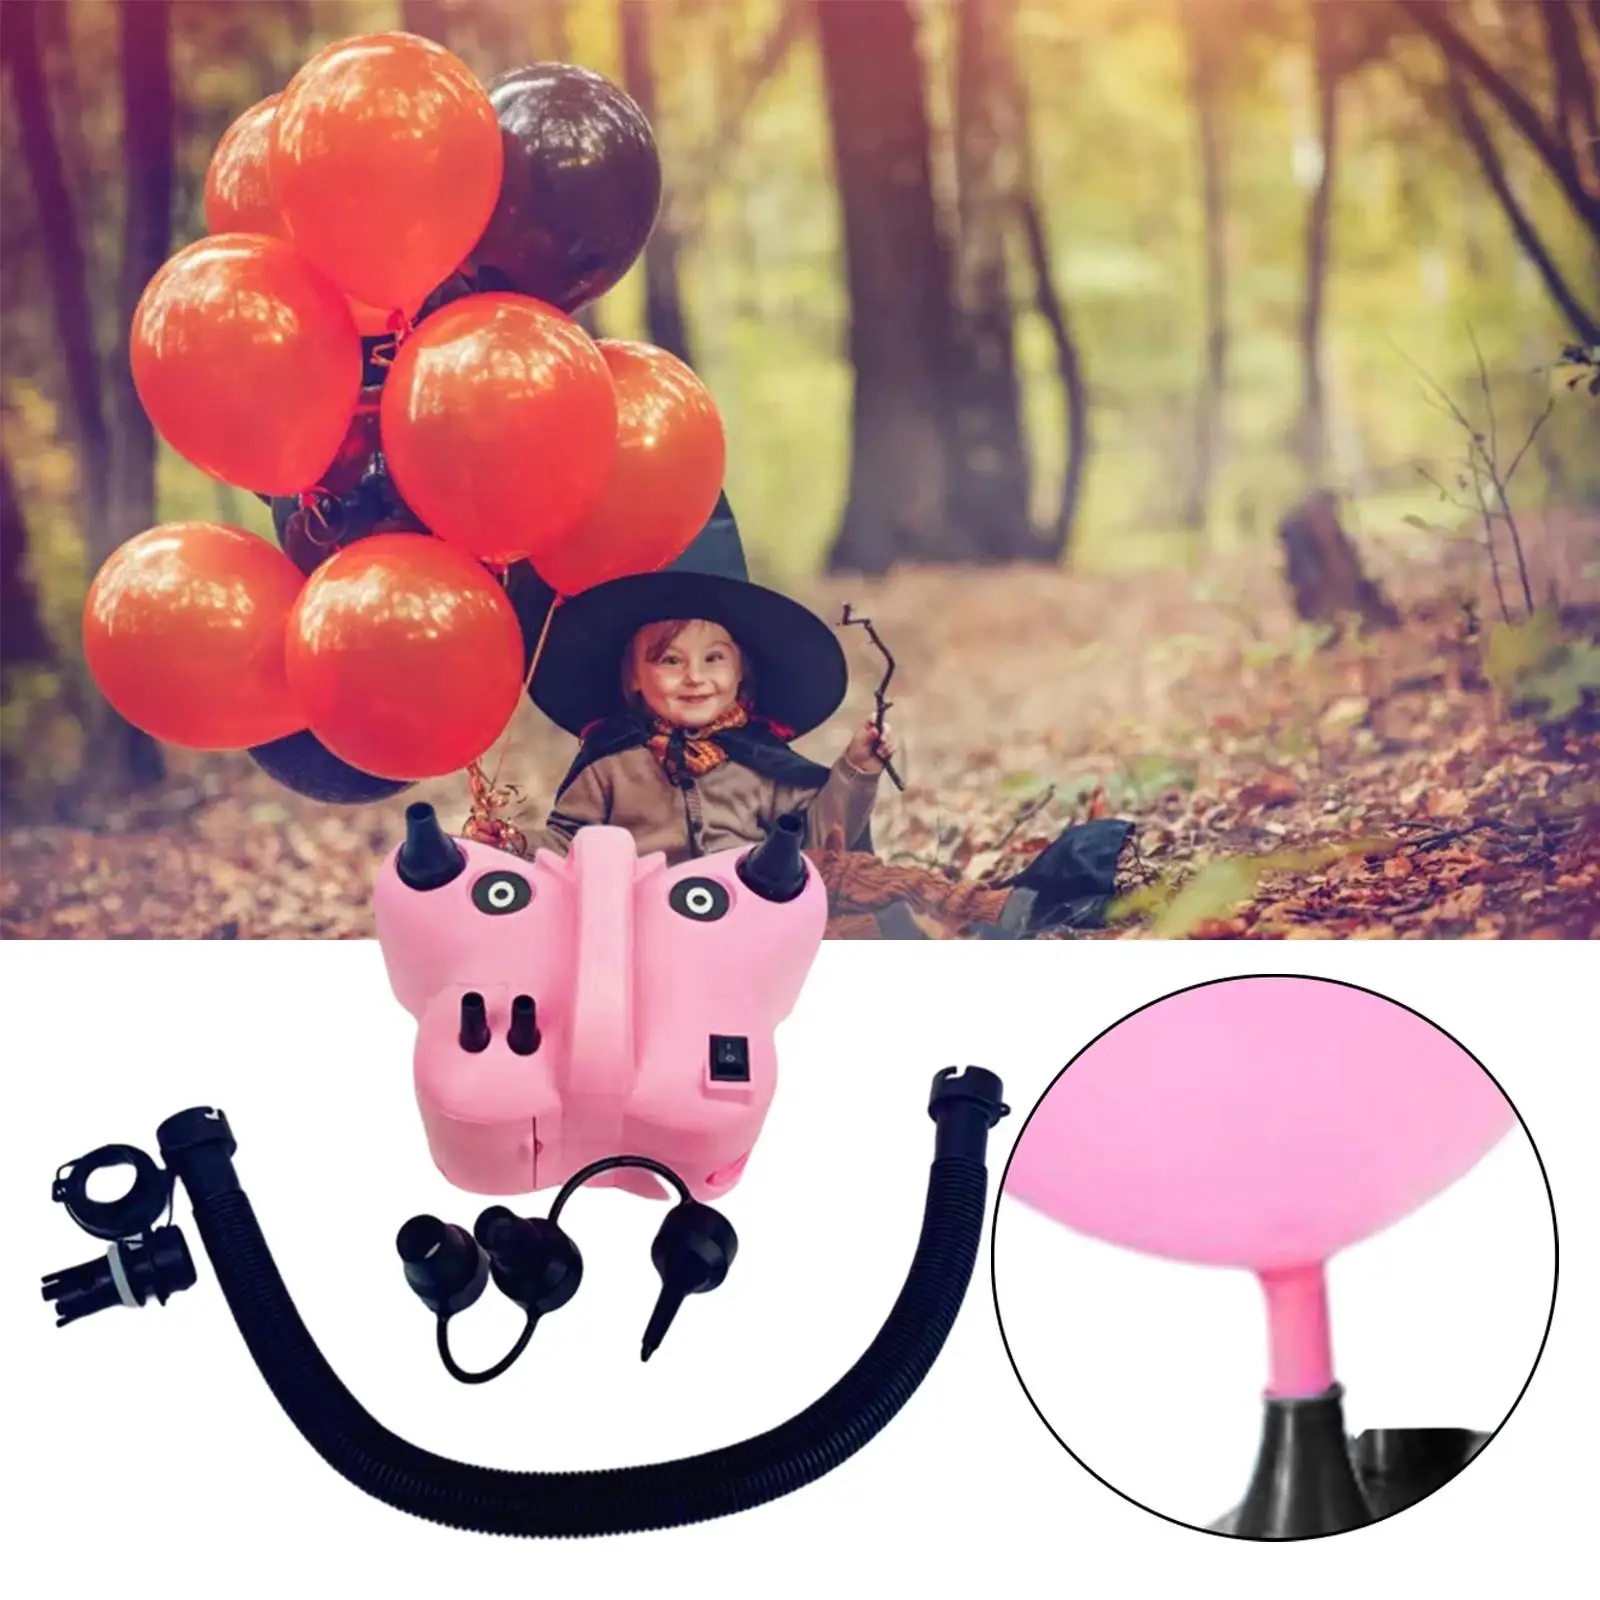 Portable Electric Balloon Inflator Pump Fast and Easy for Ballon Arch Garland Yoga Ball